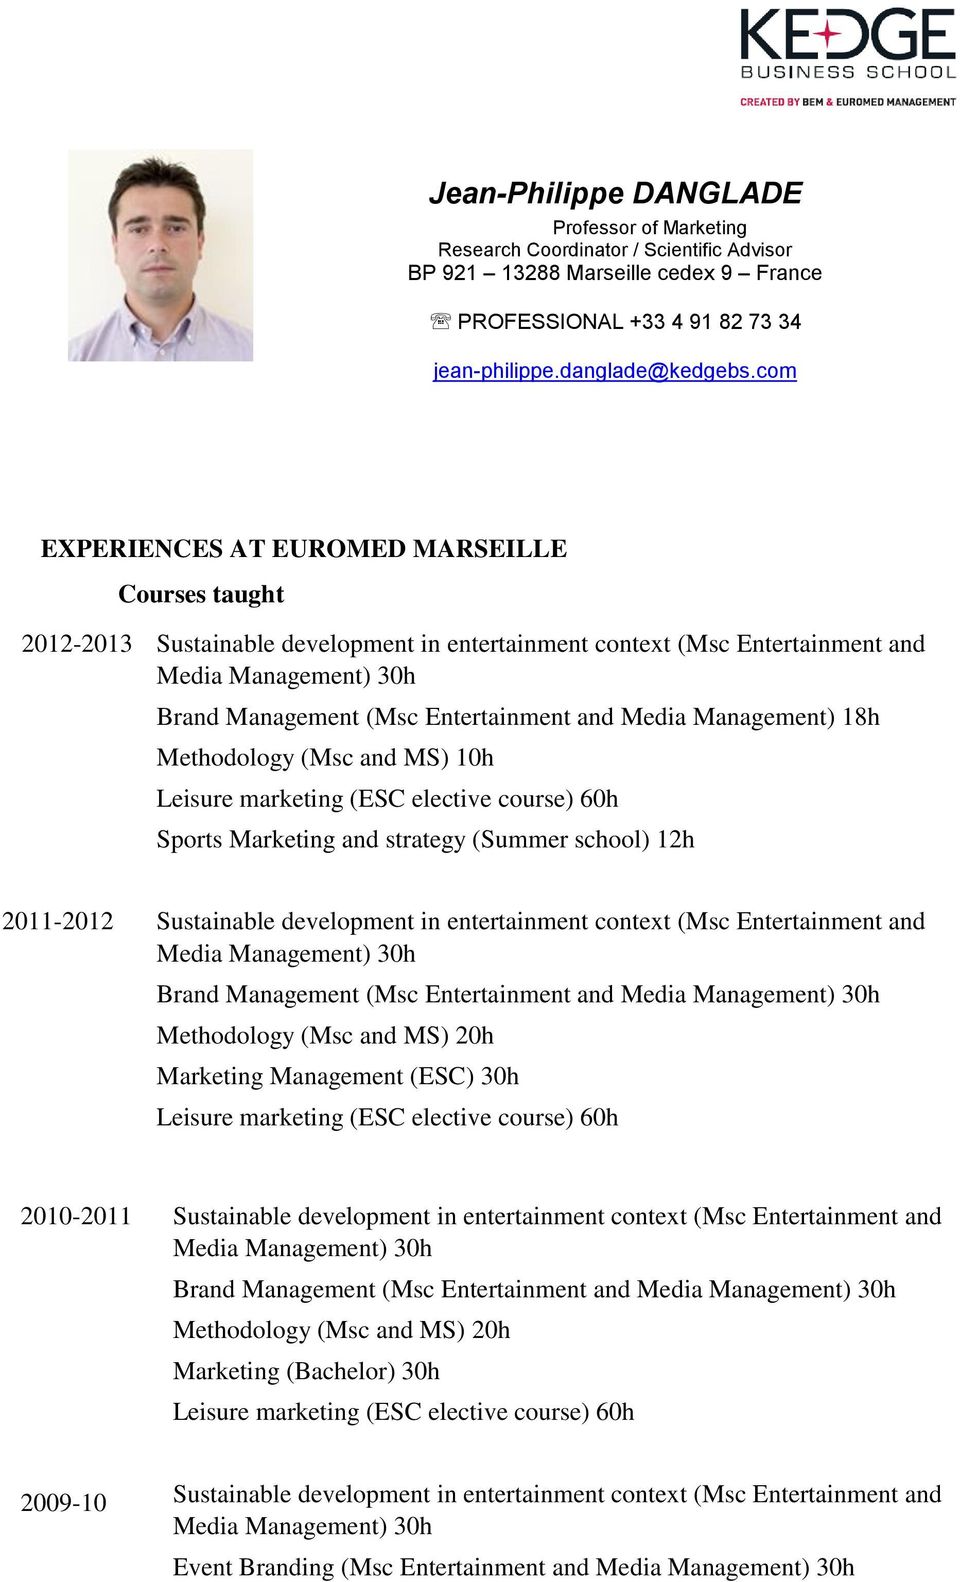 Methodology (Msc and MS) 10h Leisure marketing (ESC elective course) 60h Sports Marketing and strategy (Summer school) 12h 2011-2012 Sustainable development in entertainment context (Msc